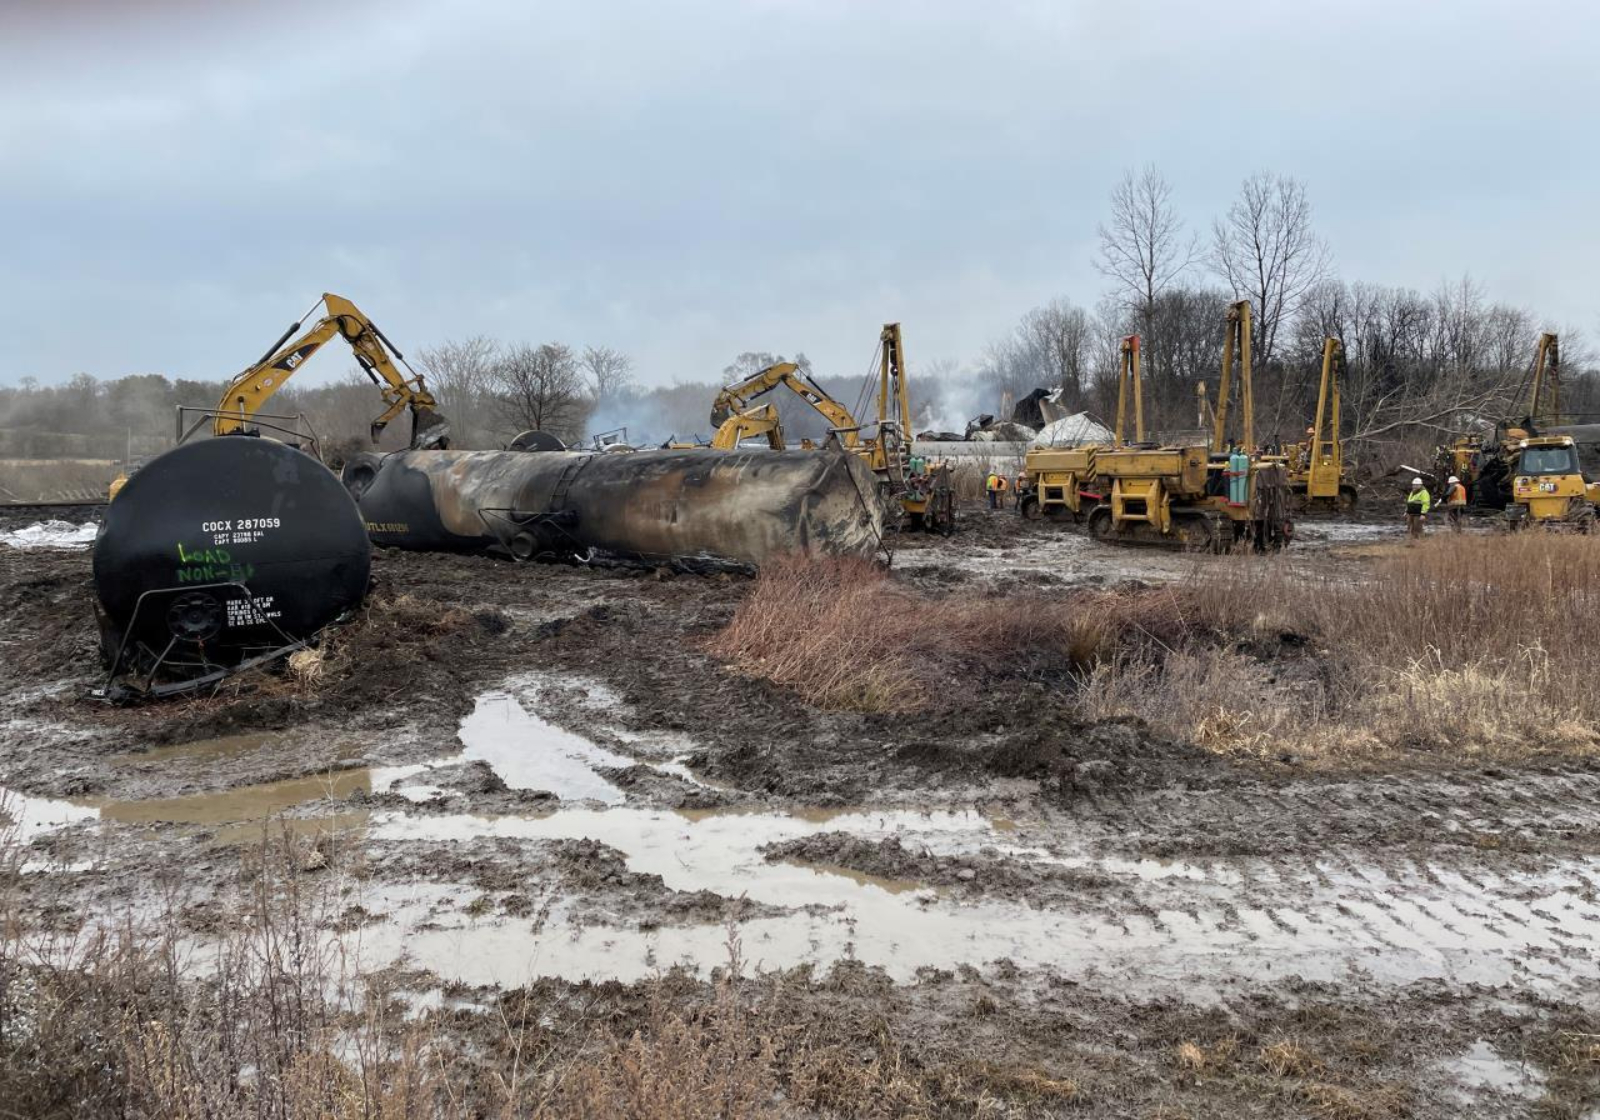 Construction equipment works on derailed trains. There is snow on the ground and bare trees in the background.